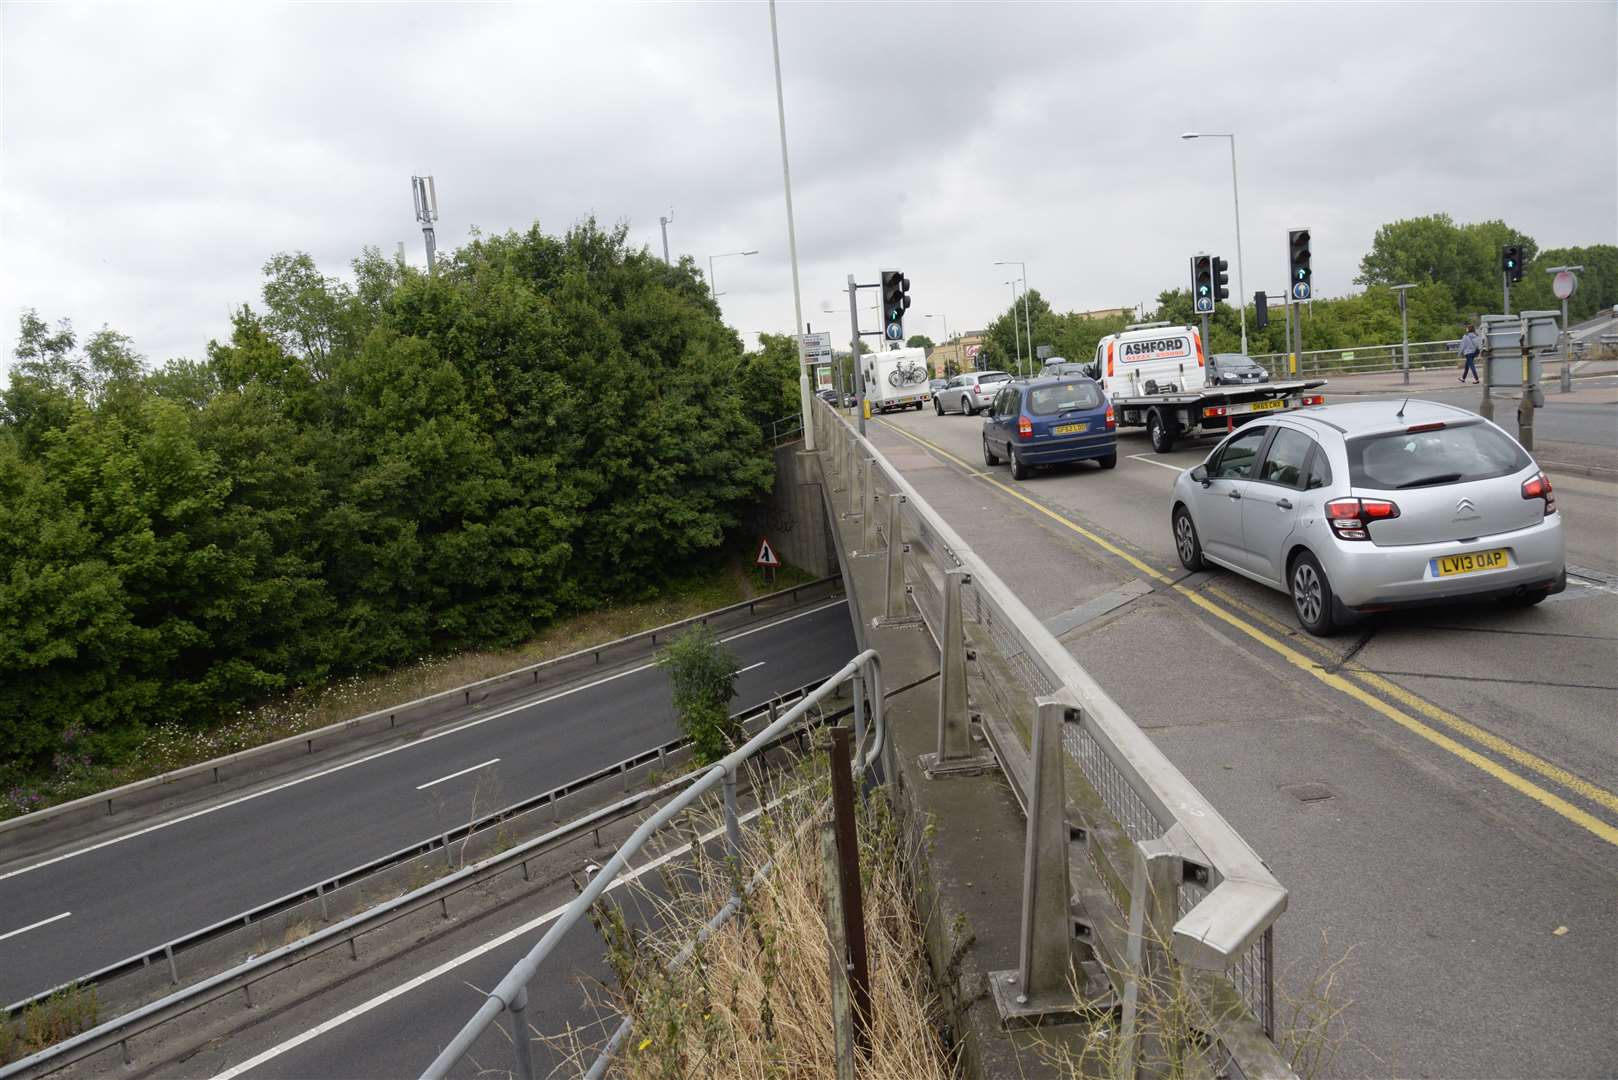 Plans for a coastbound slip road off the A2 have not progressed